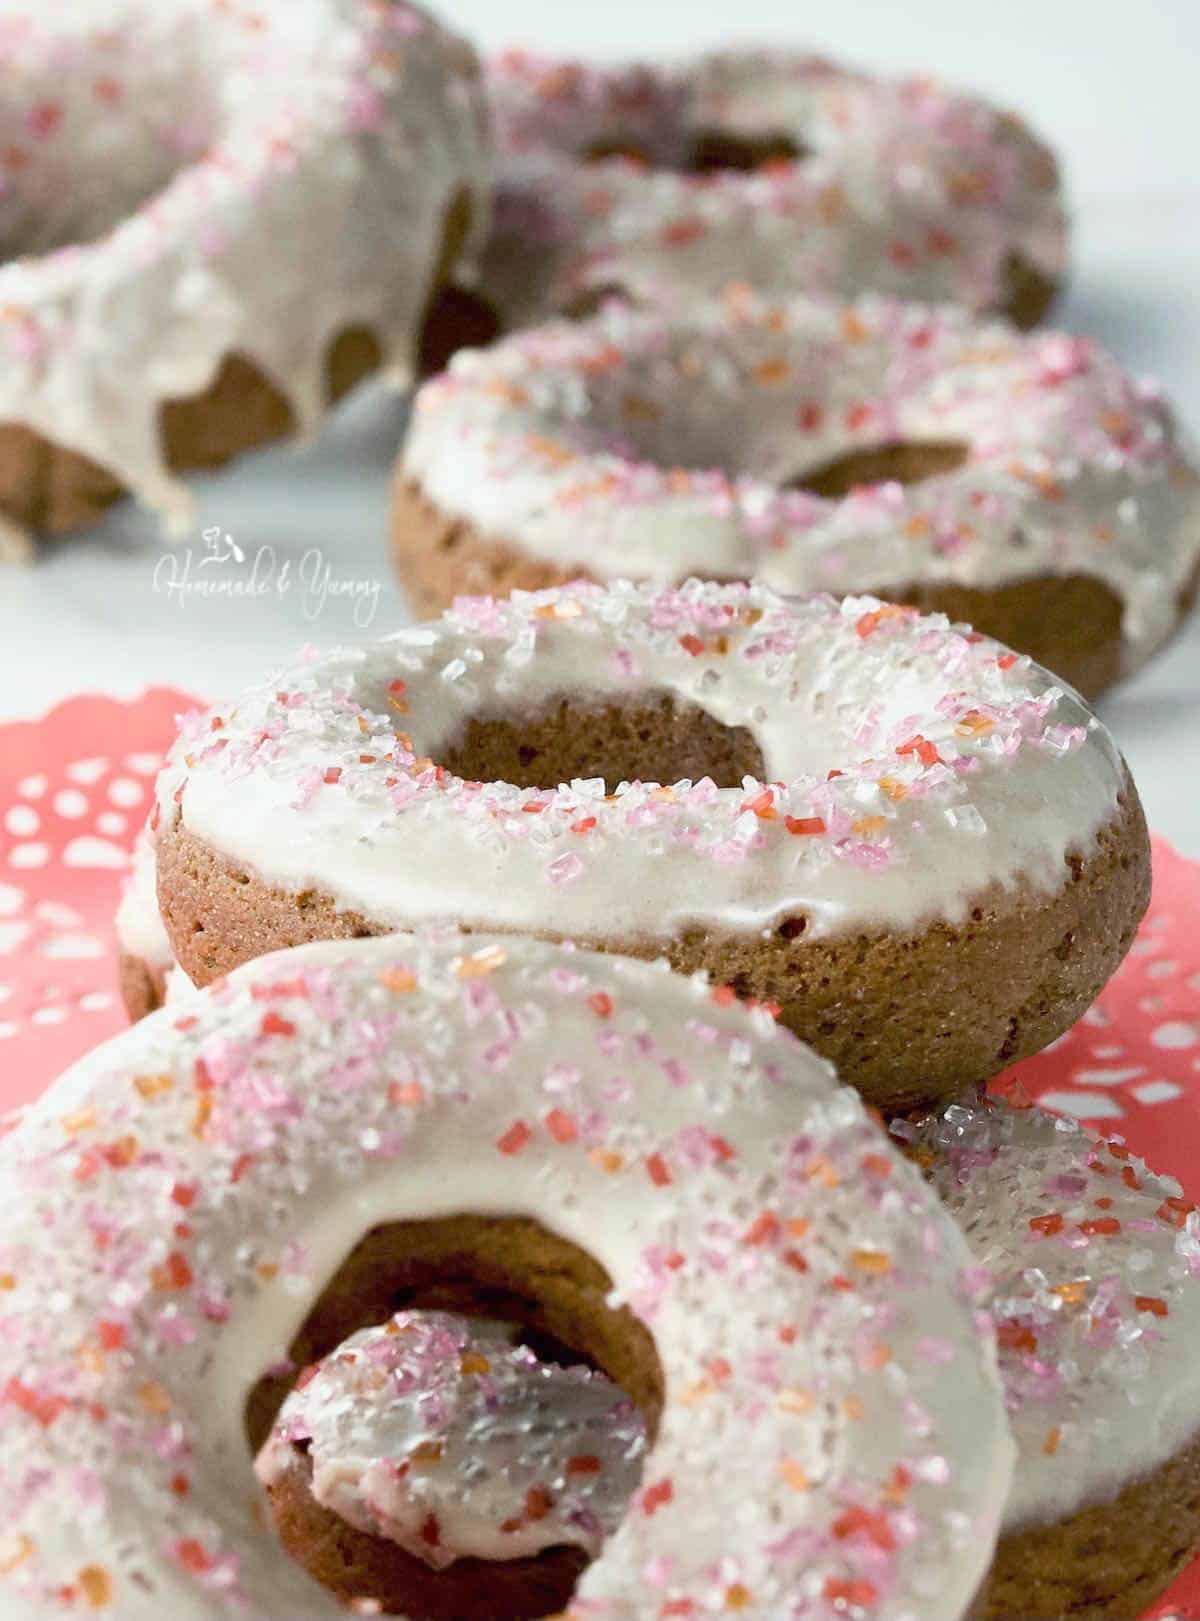 Baked Mexican Chocolate Chile Mocha donuts.